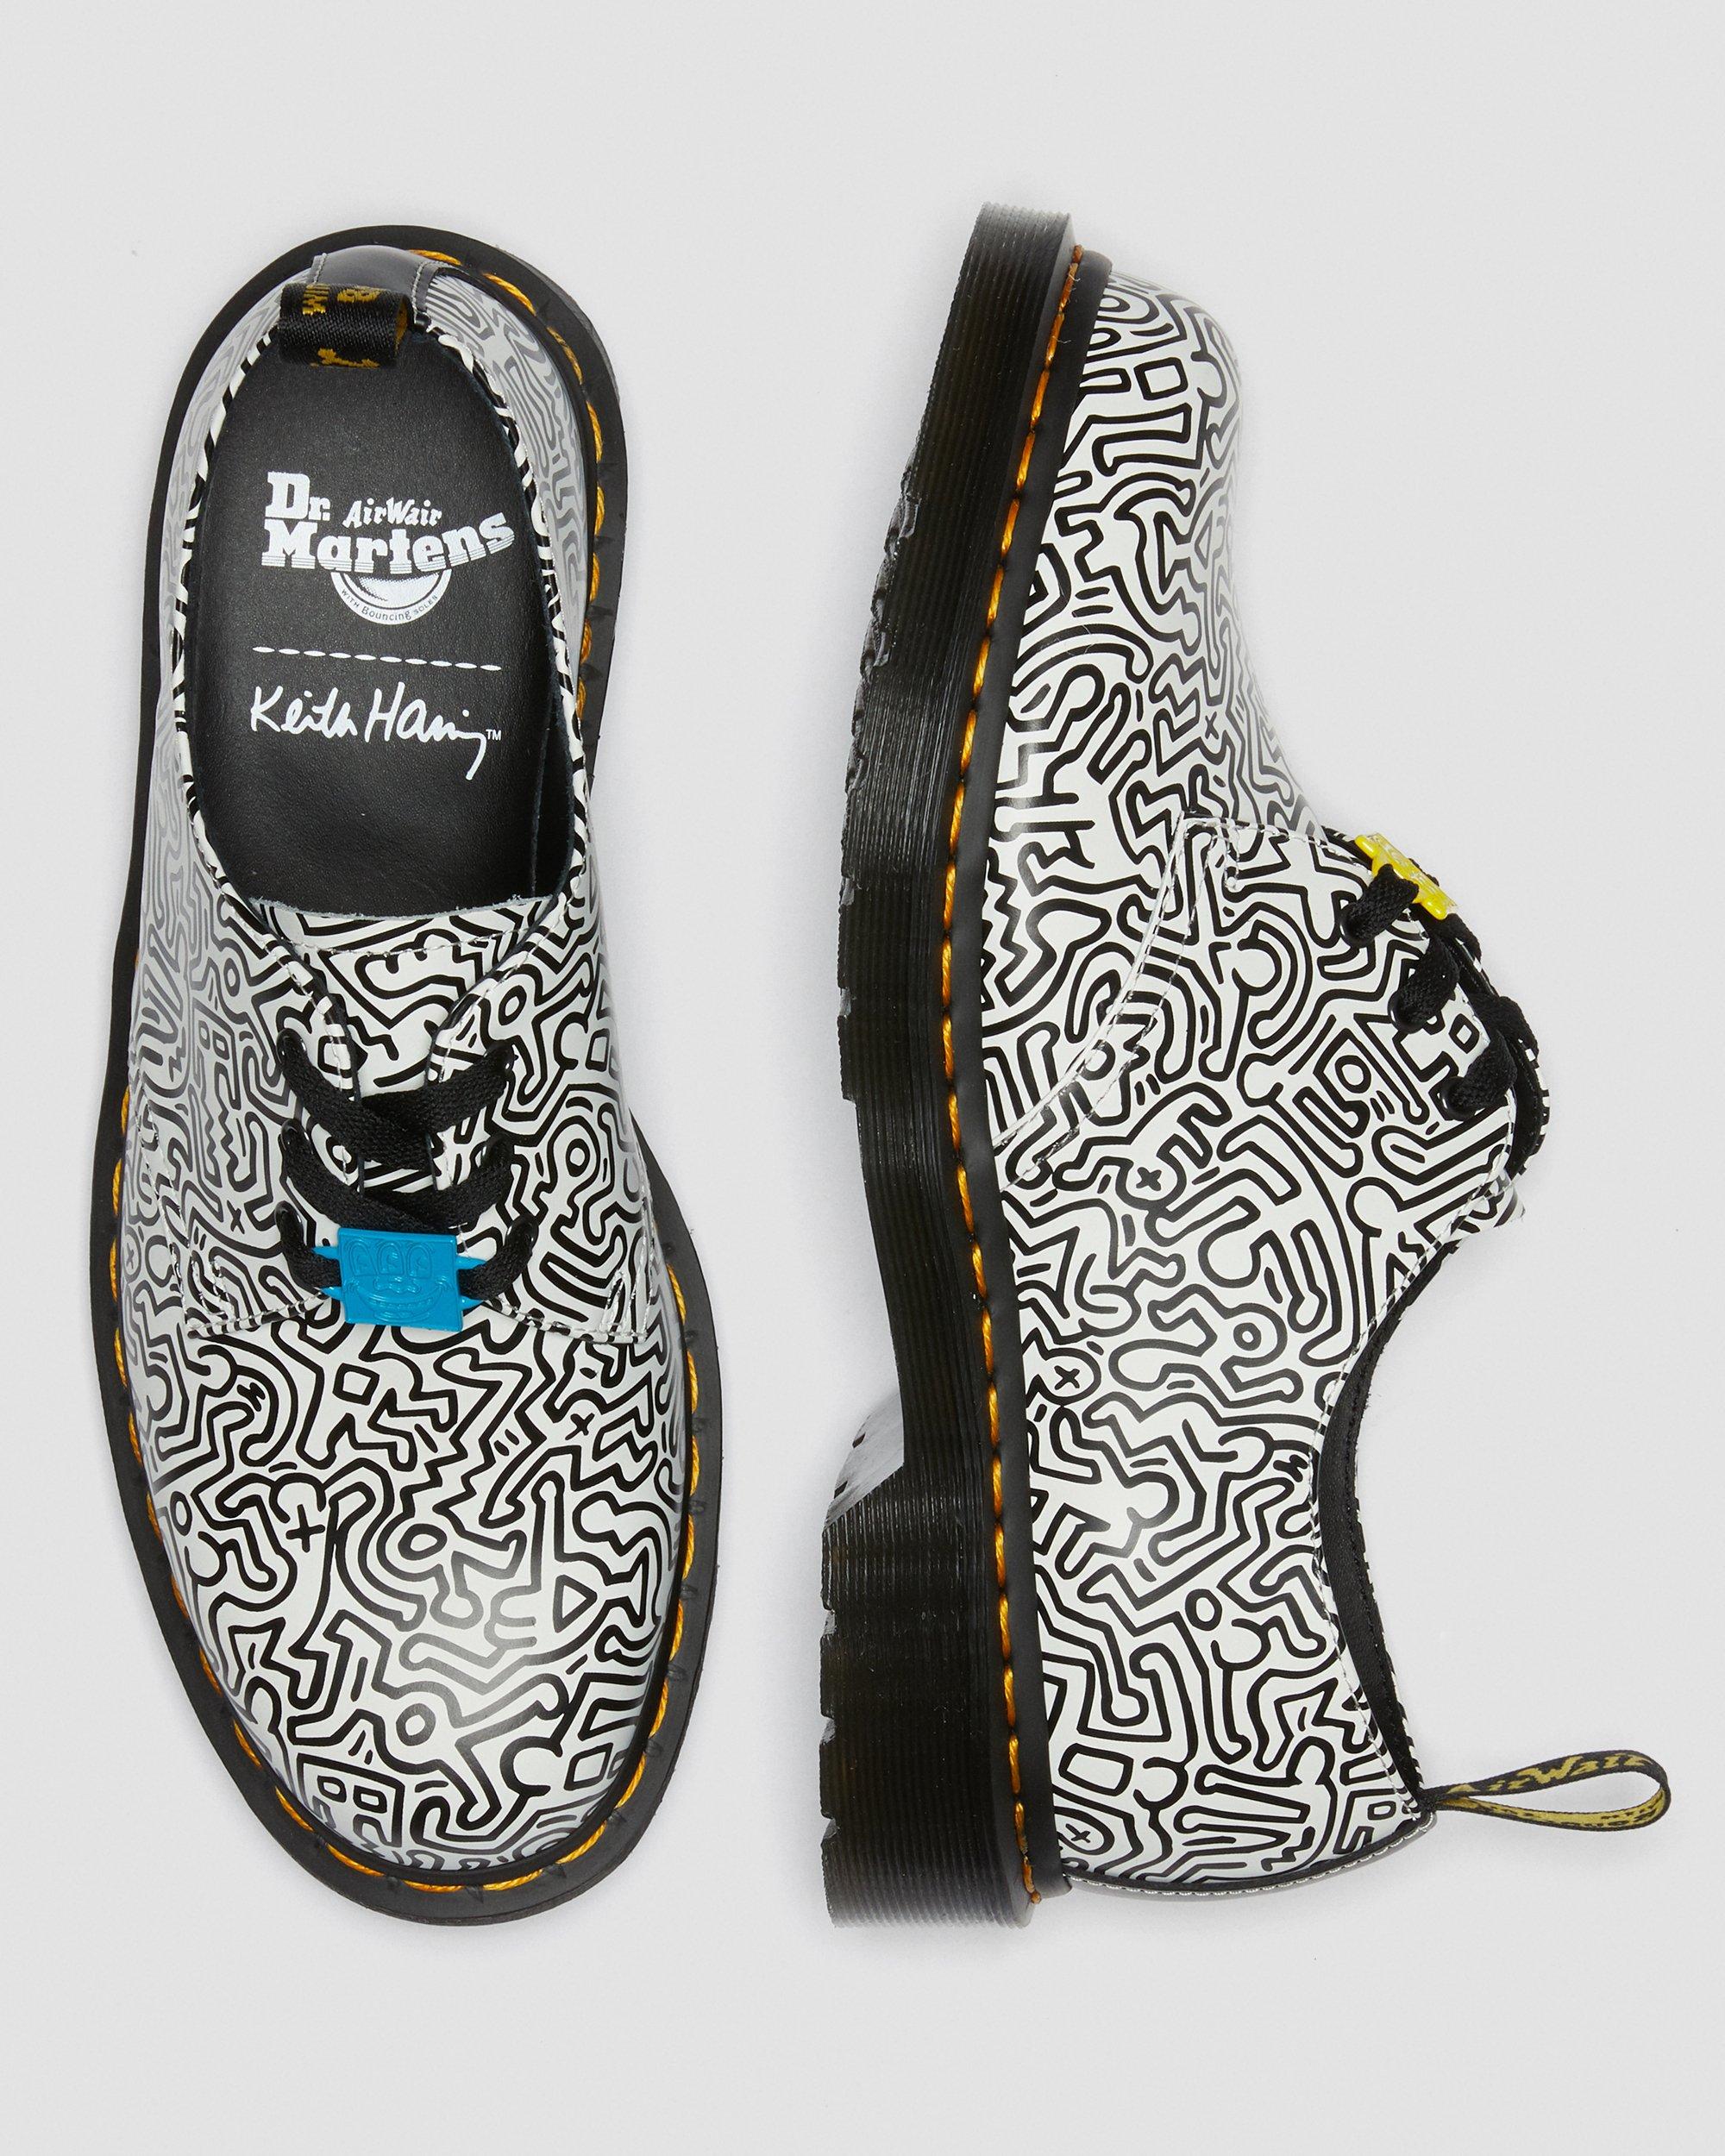 https://i1.adis.ws/i/drmartens/26833009.88.jpg?$large$1461 Keith Haring Black & White Printed Leather Shoes Dr. Martens